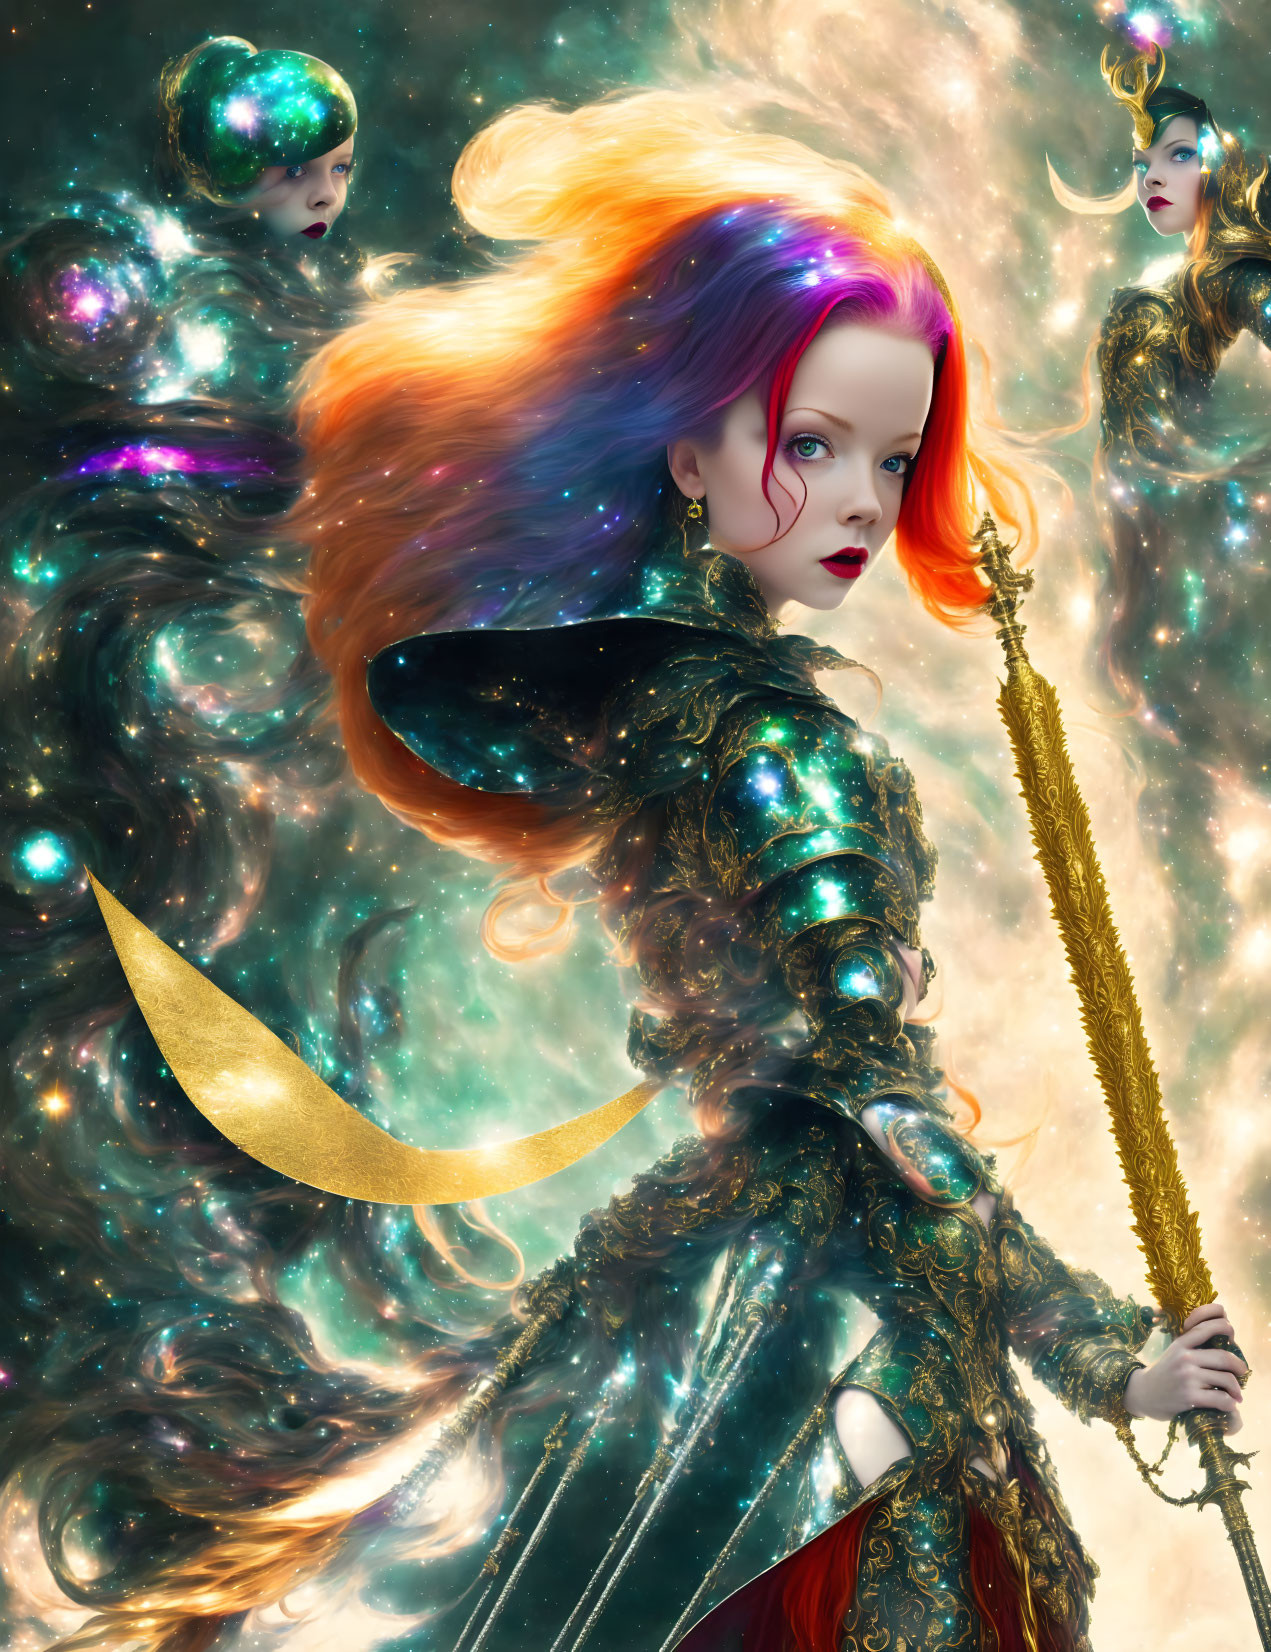 Vibrant multicolored hair, ornate armor, and golden staff in cosmic setting.